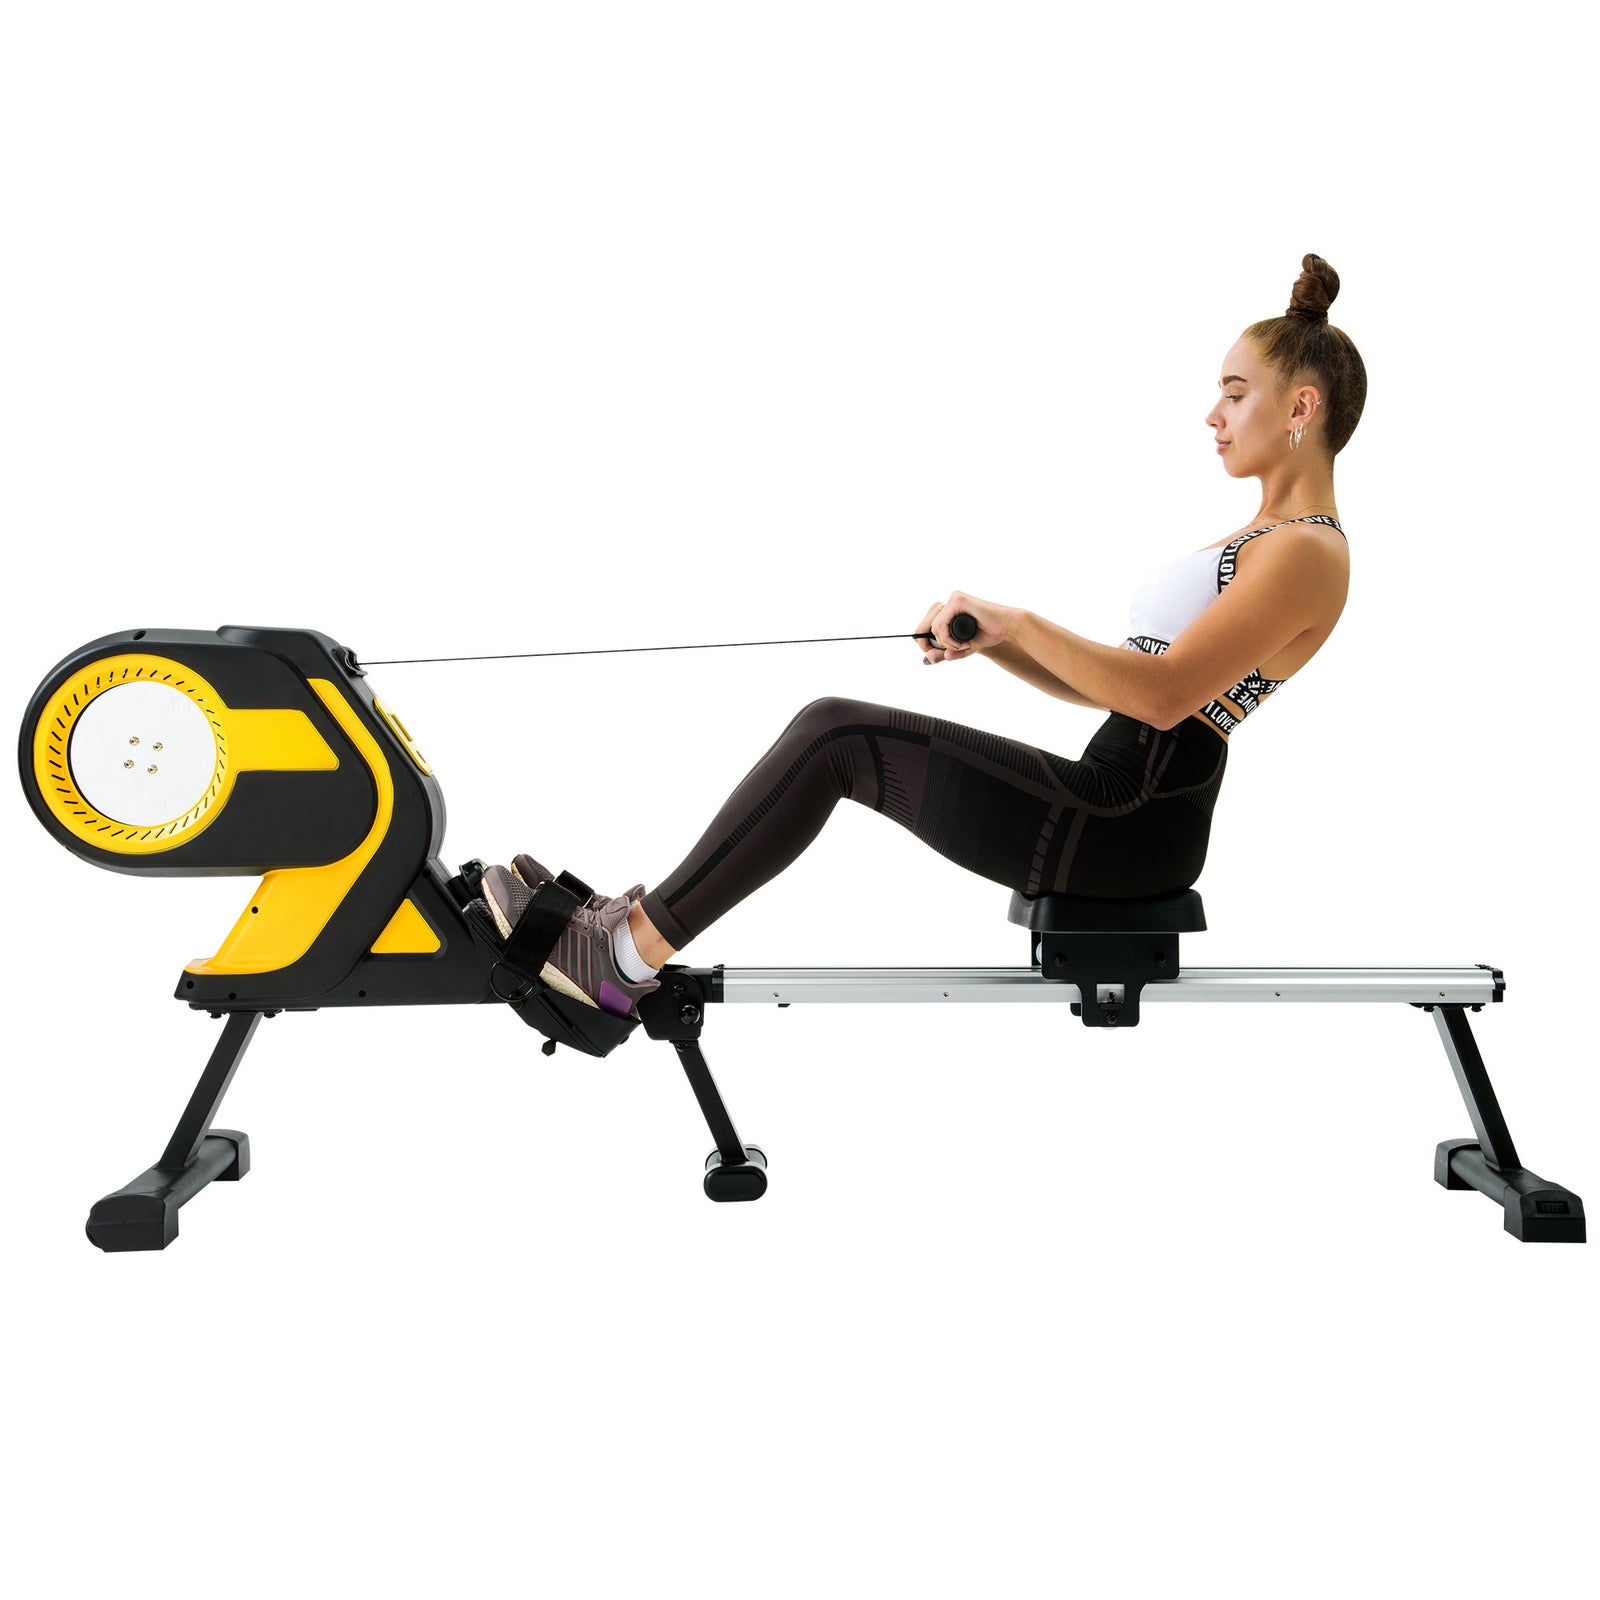 46" Slide Rail Compact Folding Cardio Workout Rowing Machine with LCD Monitor